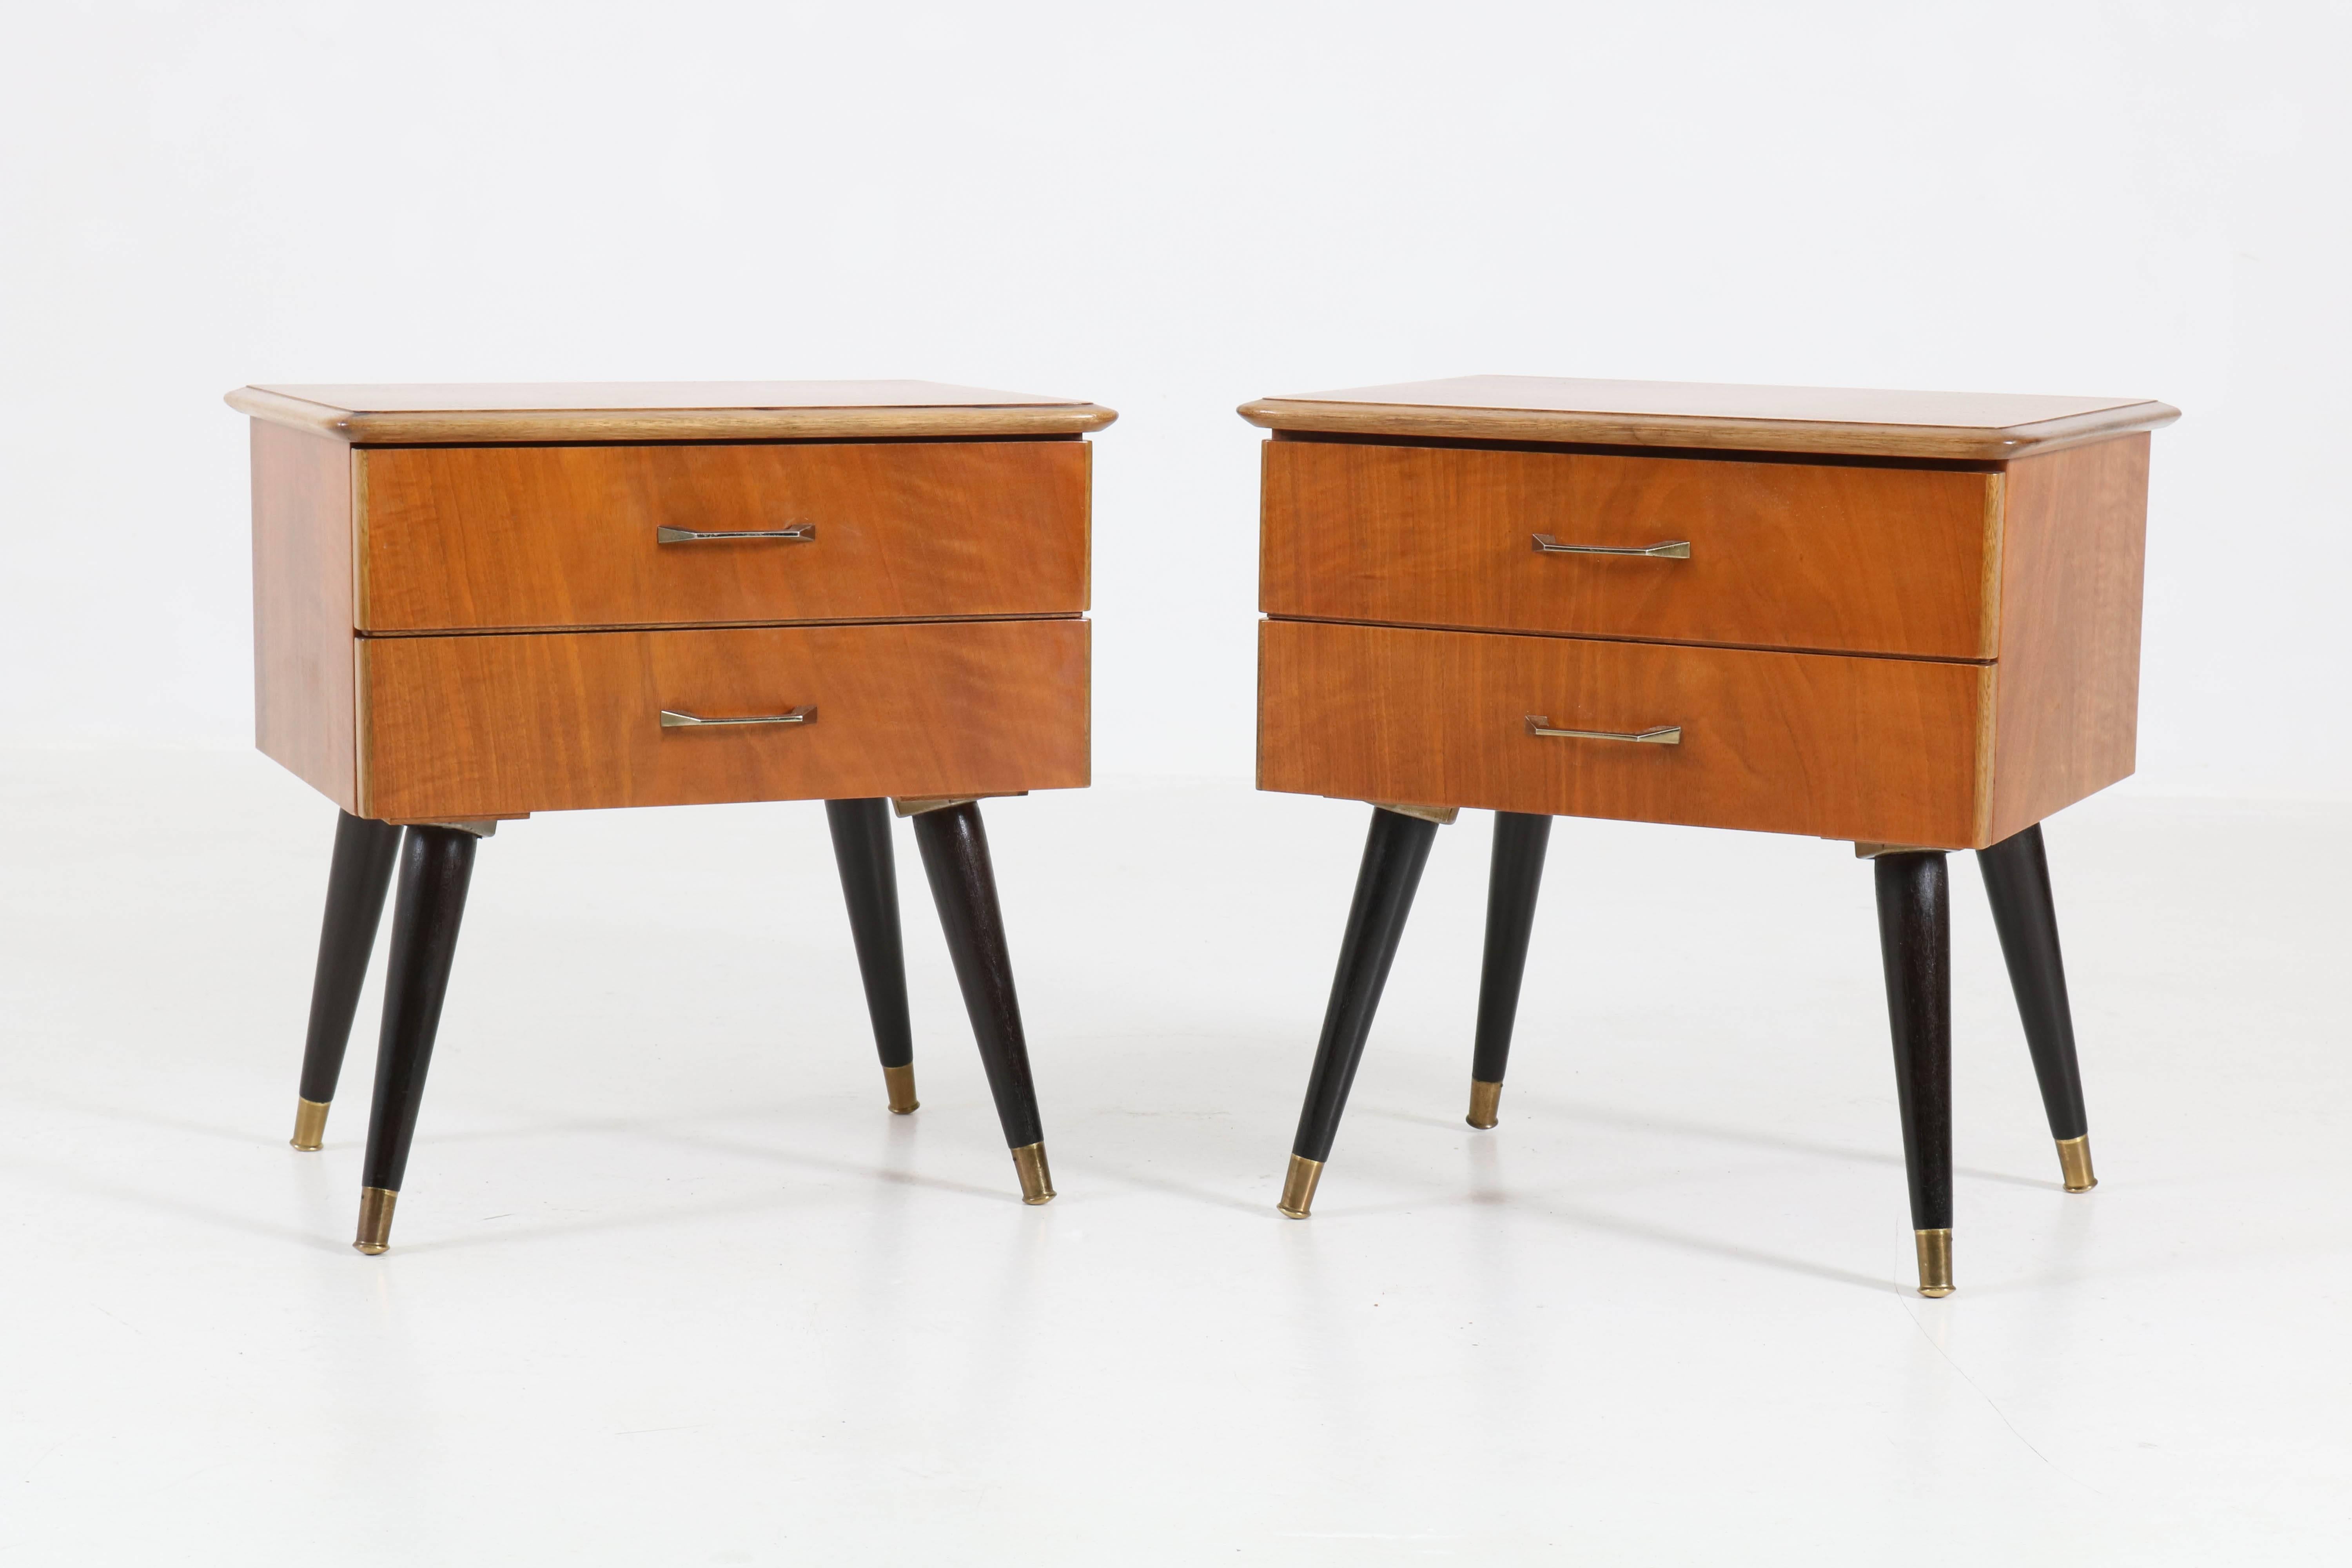 Elegant pair of Mid-Century Modern nightstands or bedside tables, 1950s.
Sleek Italian design from the 1950.
Walnut with original ebonized legs.
In good original condition with minor wear consistent with age and use,
preserving a beautiful